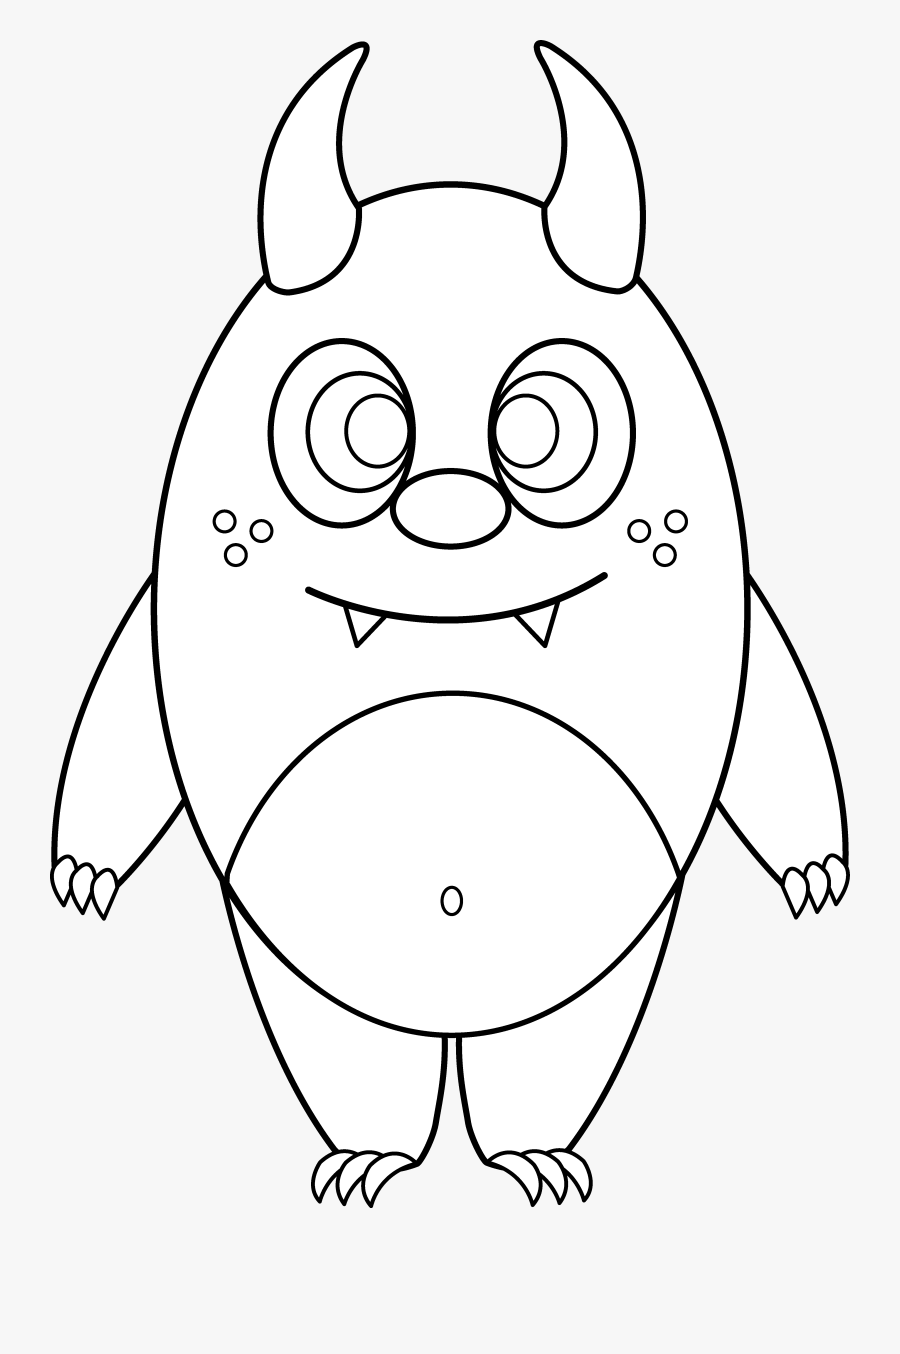 Silly Monster Coloring Pages - Cute Little Monsters To Draw, Transparent Clipart